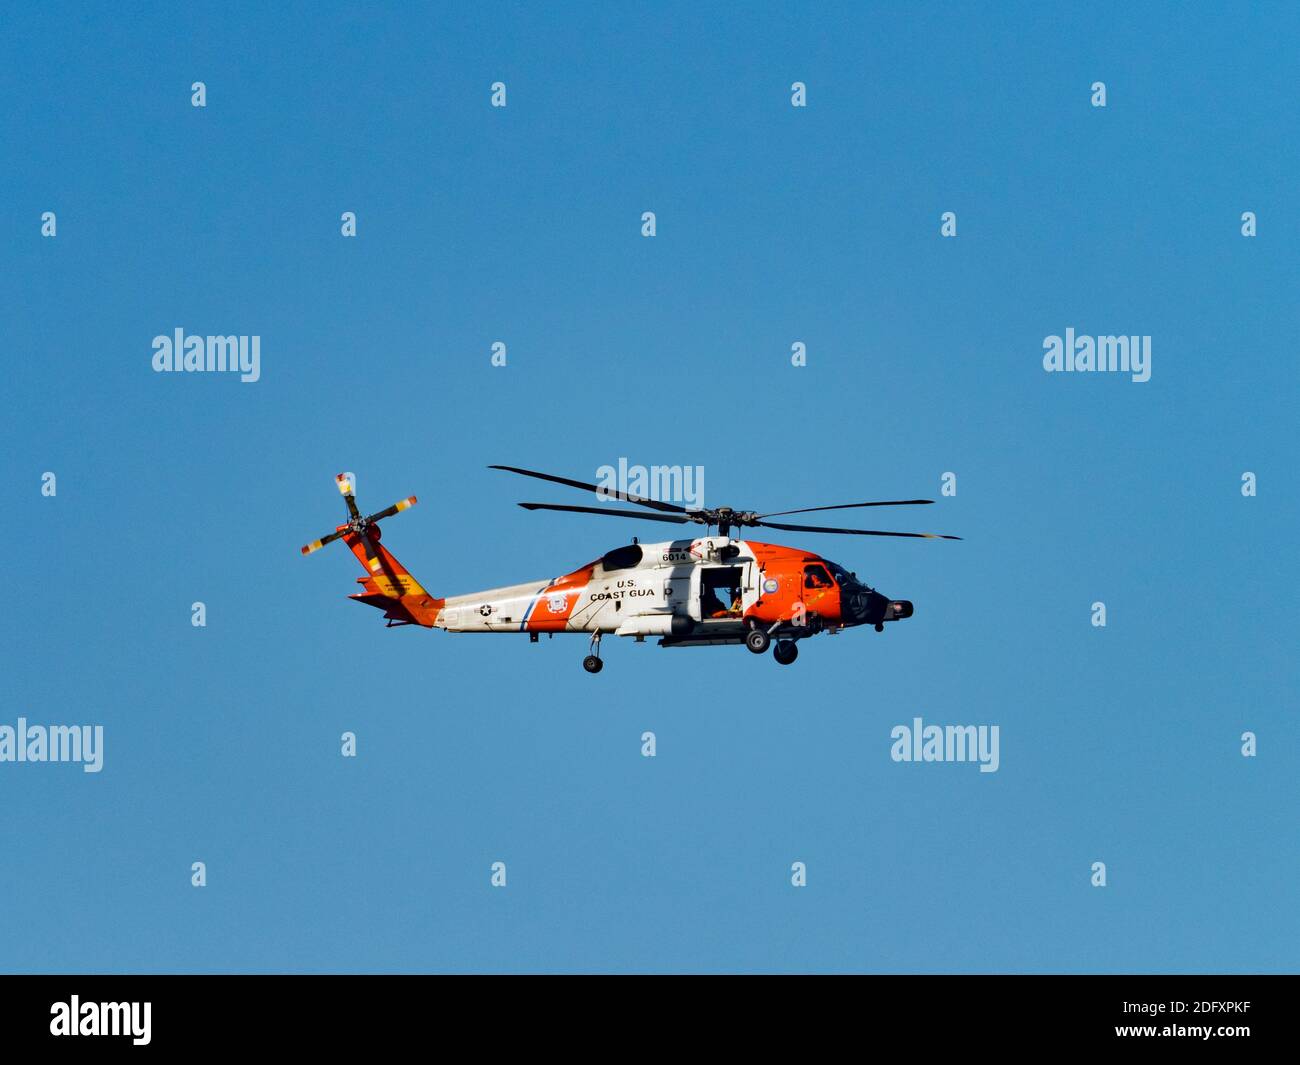 US Coast Guard helicopter 6014 Sikorsky patrolling over La Jolla Shores, San Diego, California, USA Stock Photo